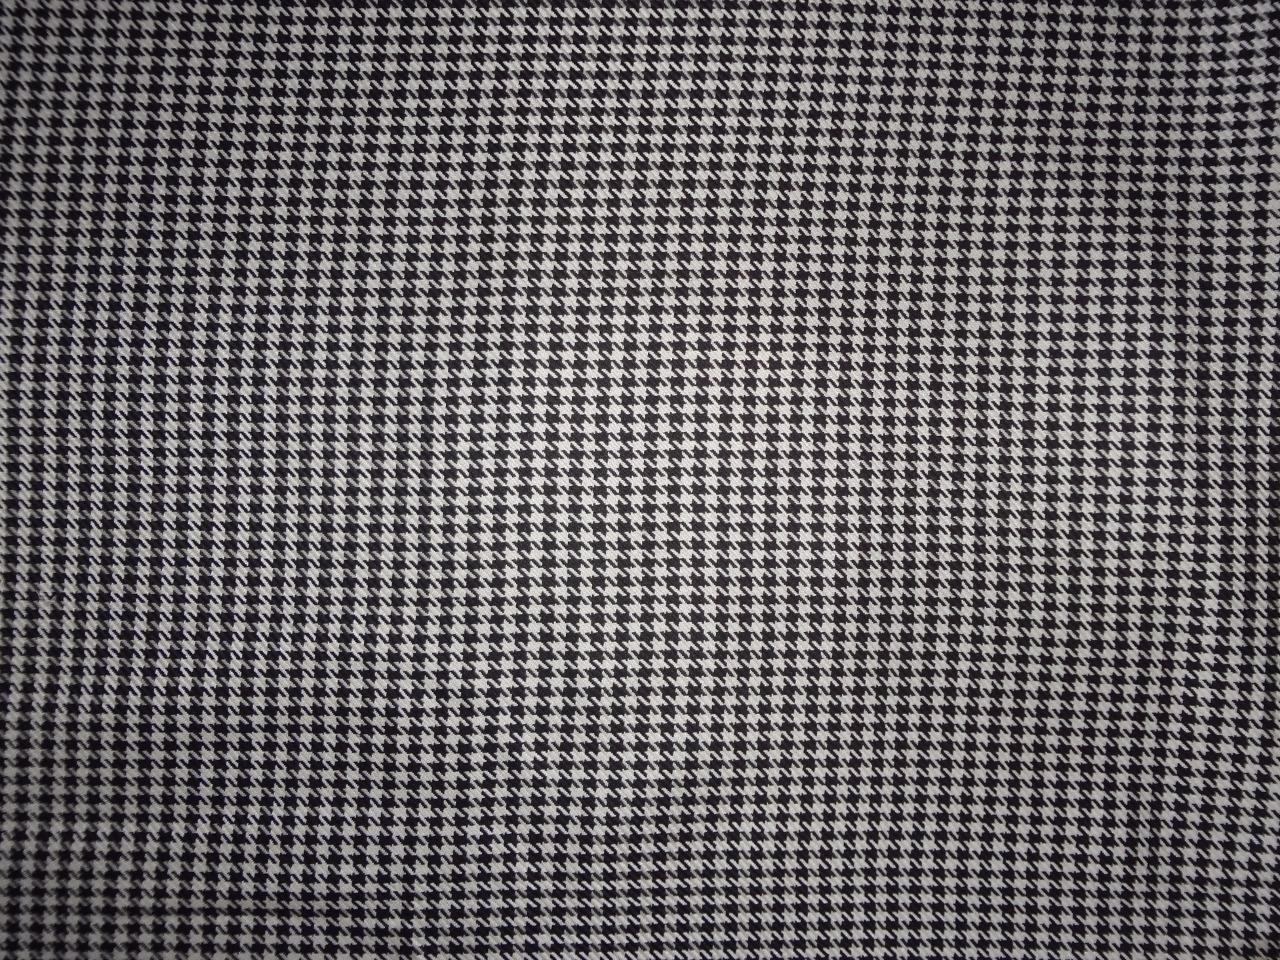 Hounds tooth silk tussar amazing for bottom wear and dress fabric [7788]